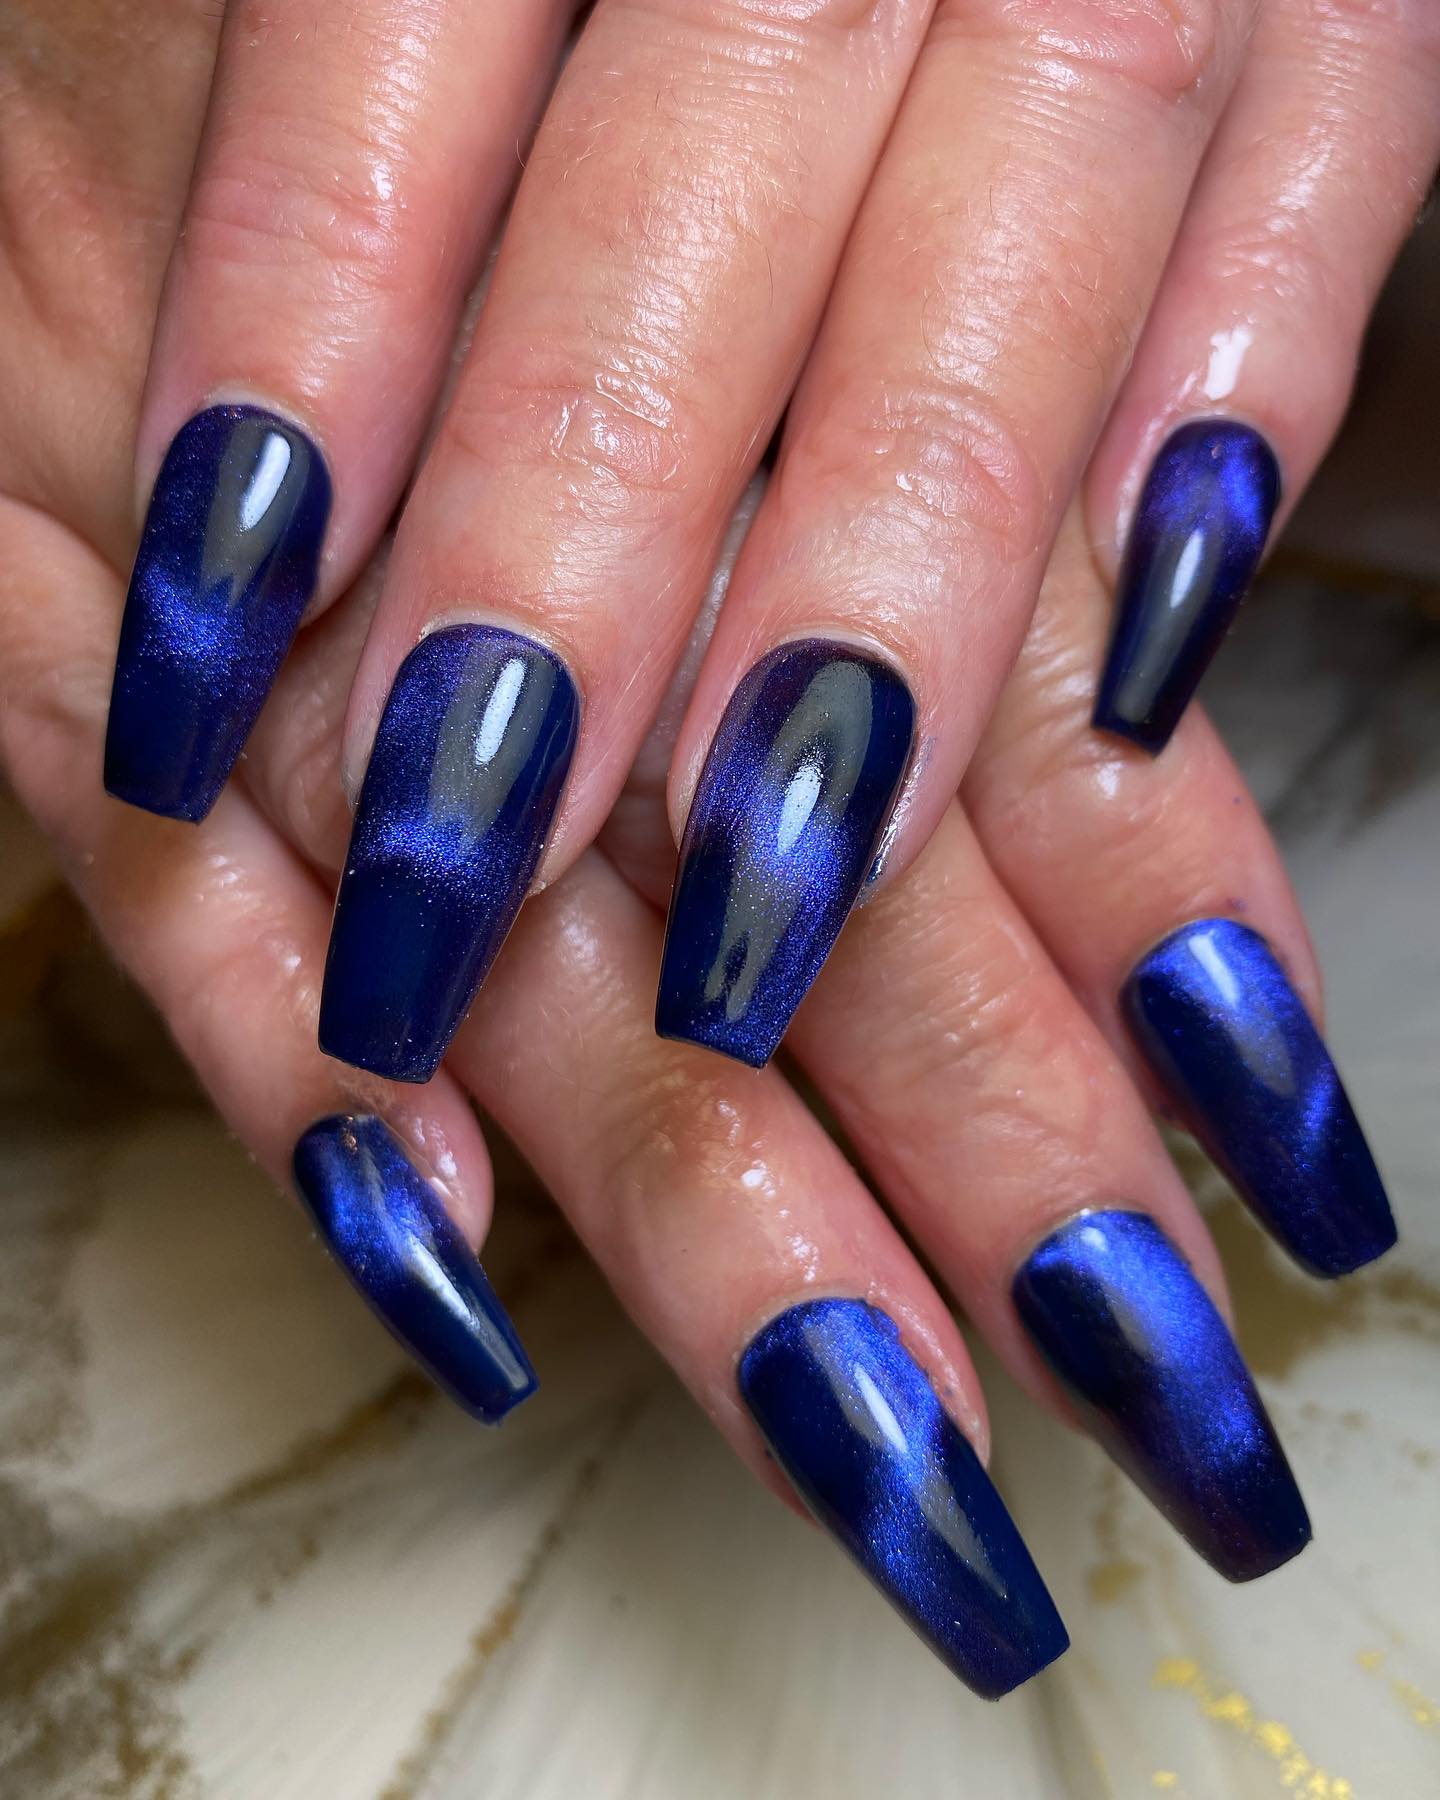 Dark blue base with a lighter blue cat eye nail design is a perfect idea. To feel the sky to the fullest, you should definitely try this out.